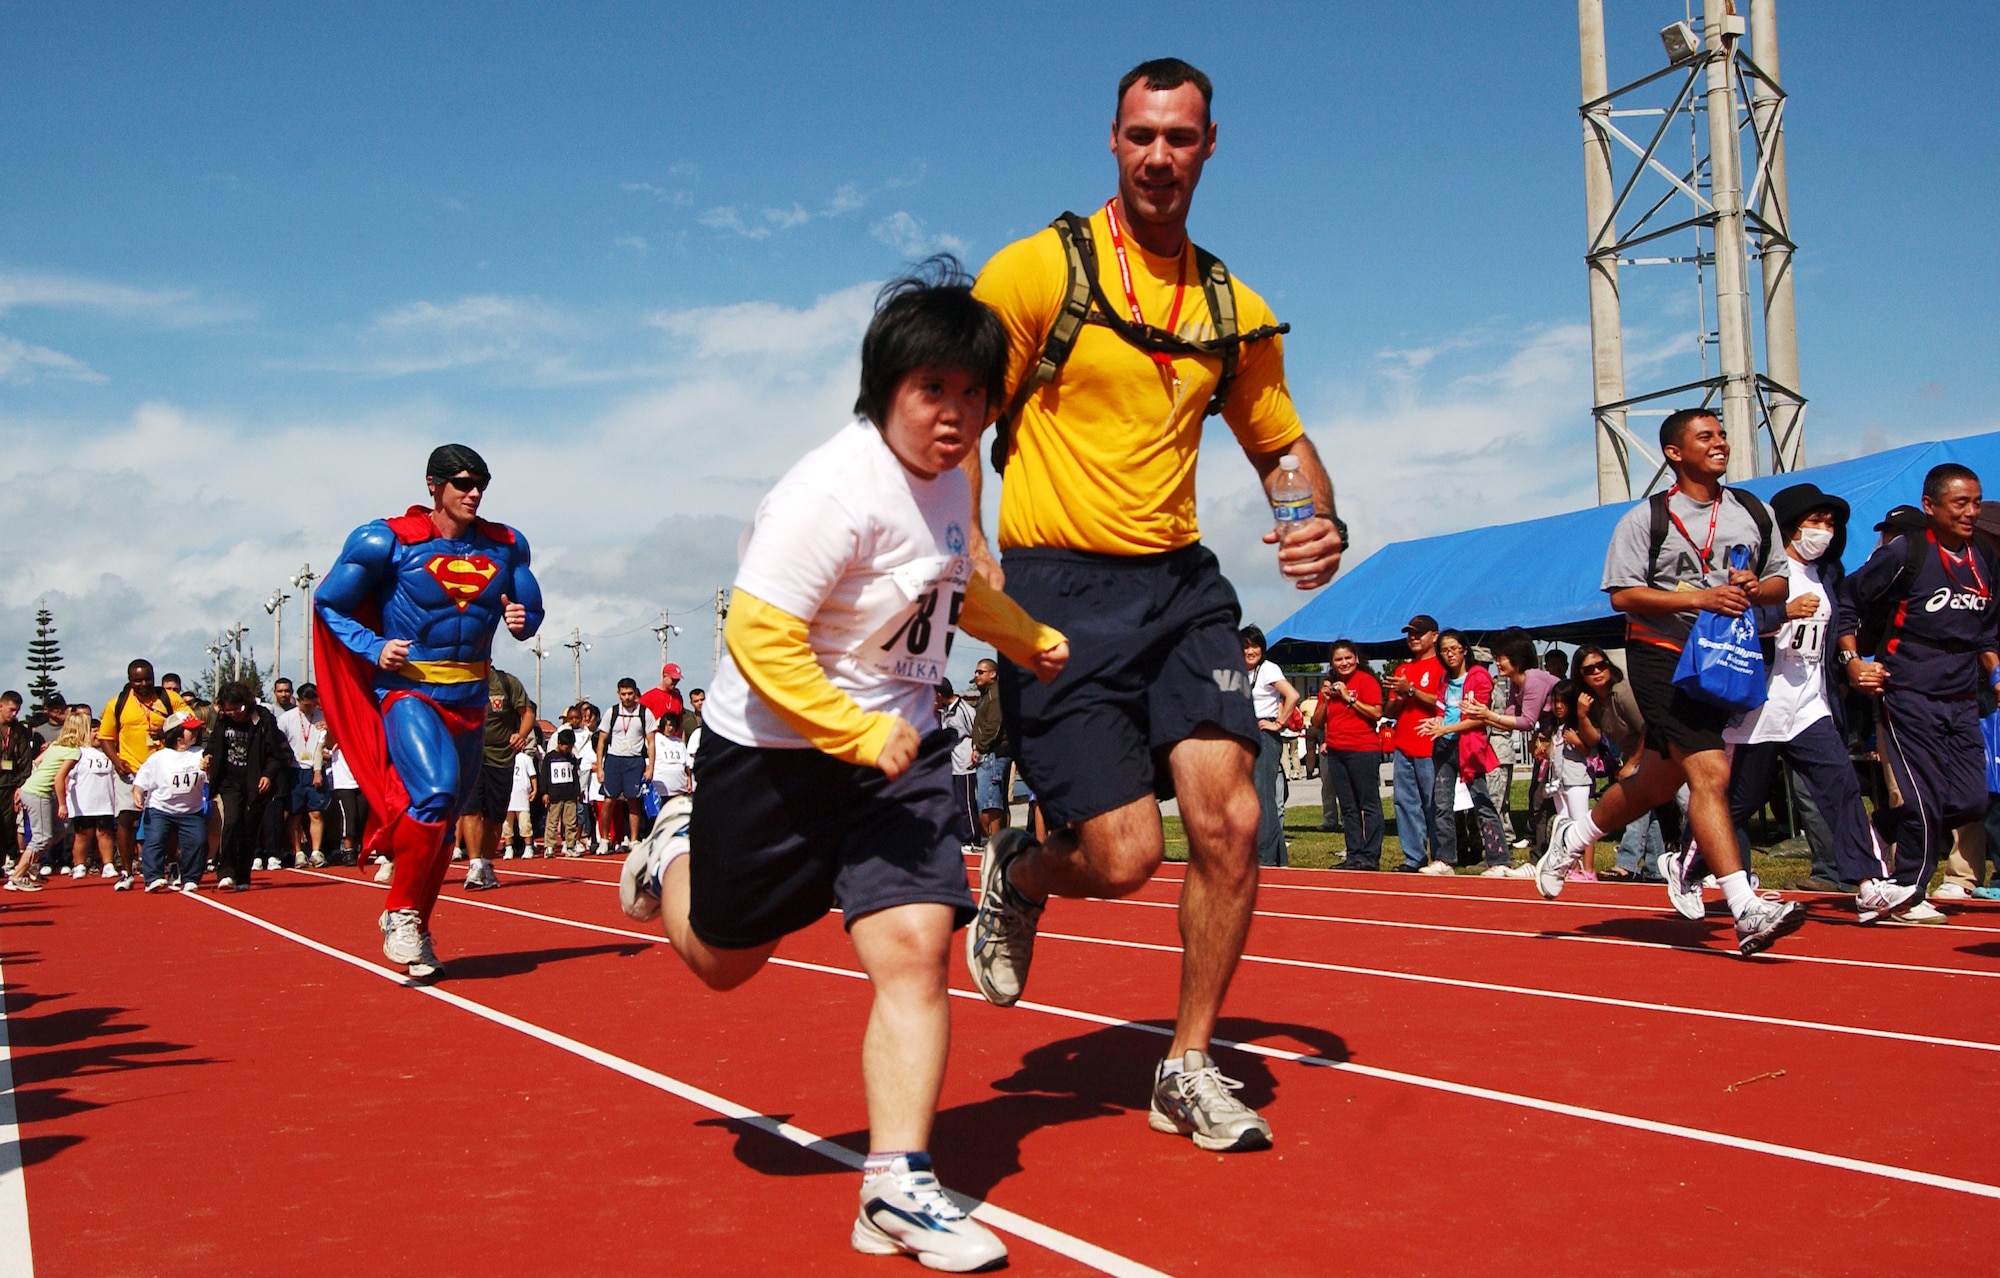 A young Okinawan girl participates in a run during the beginning of Kadena Special Olympics Nov. 14, 2009 at Kadena Air Base, Japan. Kadena hosted the 10th Annual Special Olympic Games and Art Festival for special needs Okinawan and American adult and child athletes.
(U.S. Air Force photo/Tech. Sgt. Reynaldo Ramon) 